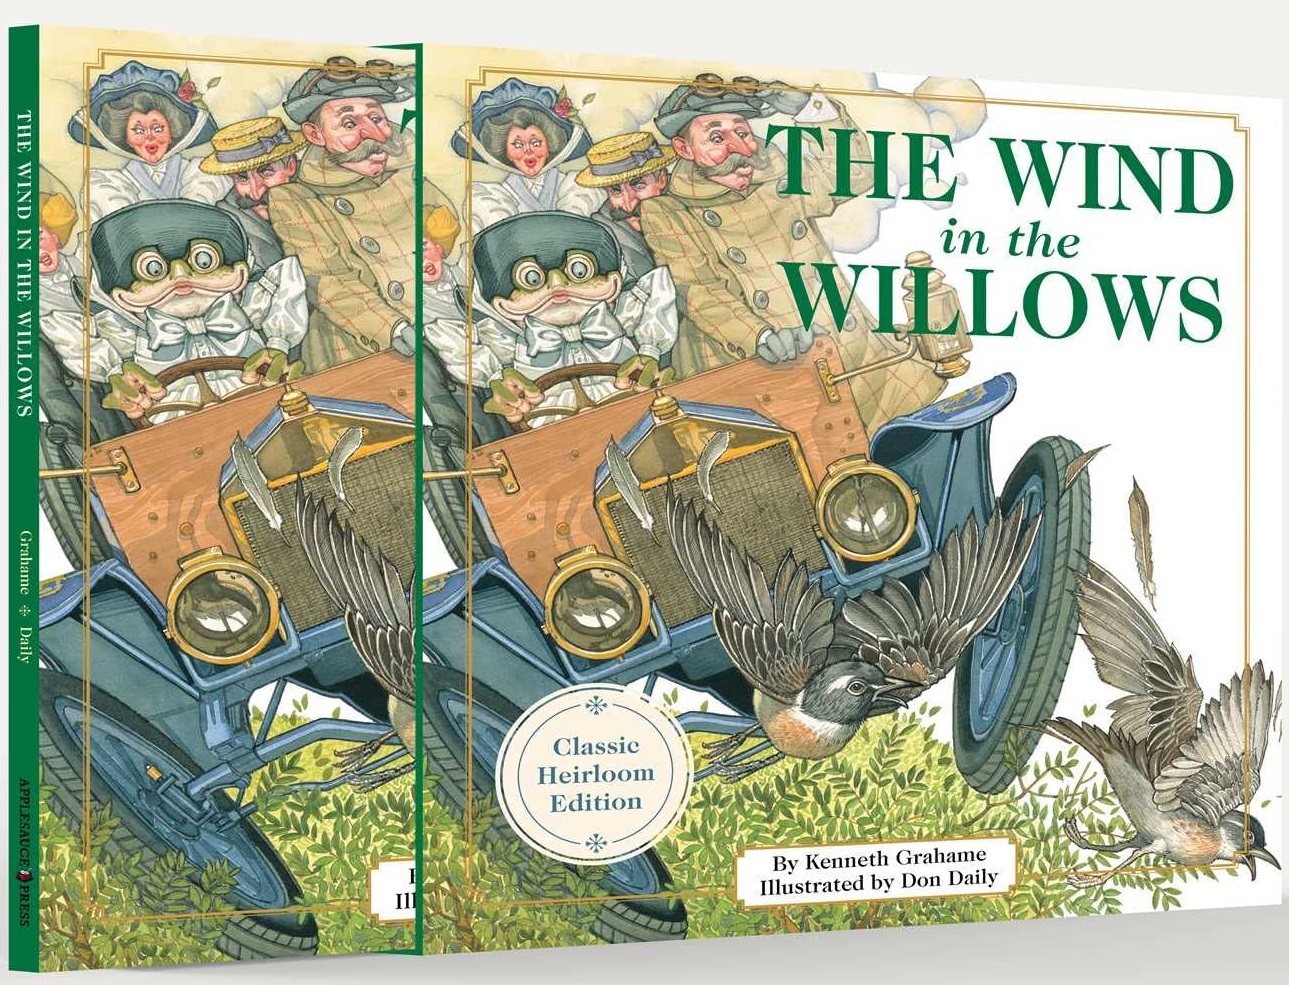 The Wind In the Willows (The Classic Heirloom Edition) | Kenneth Grahame